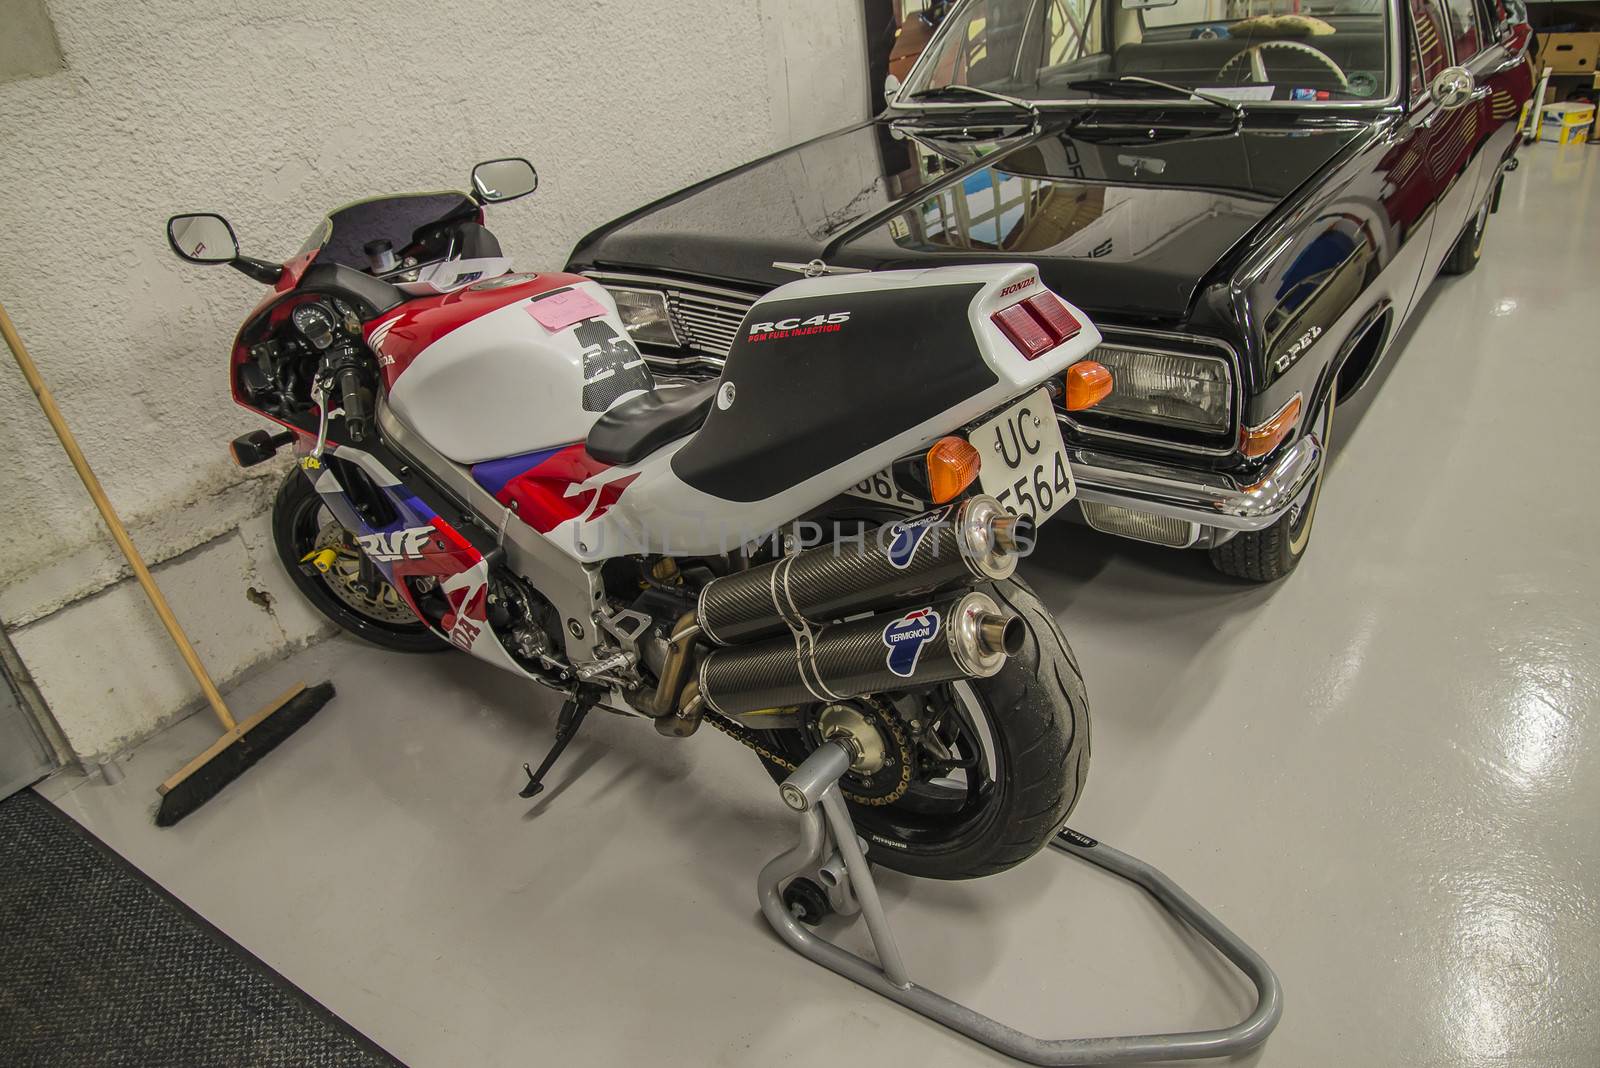 All the photos are shot in a garage in Halden, Norway where race cars and racing motorcycles are maintained and overhauled